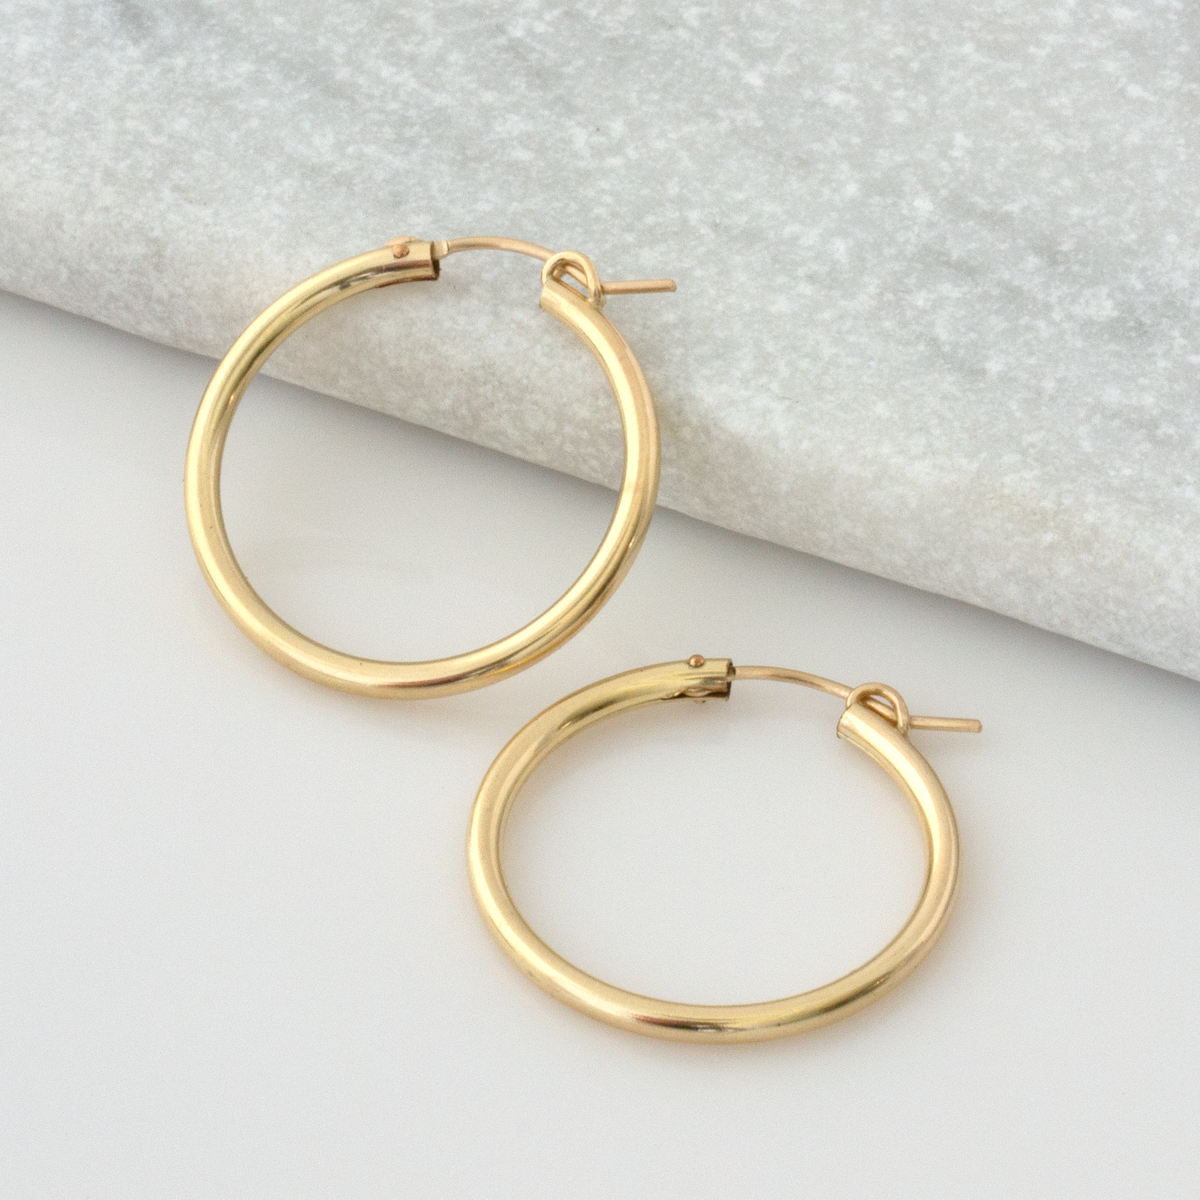 5mm Sterling Silver, Extra Large Round Hoop Earrings, 70mm (2 3/4 In) - The  Black Bow Jewelry Company